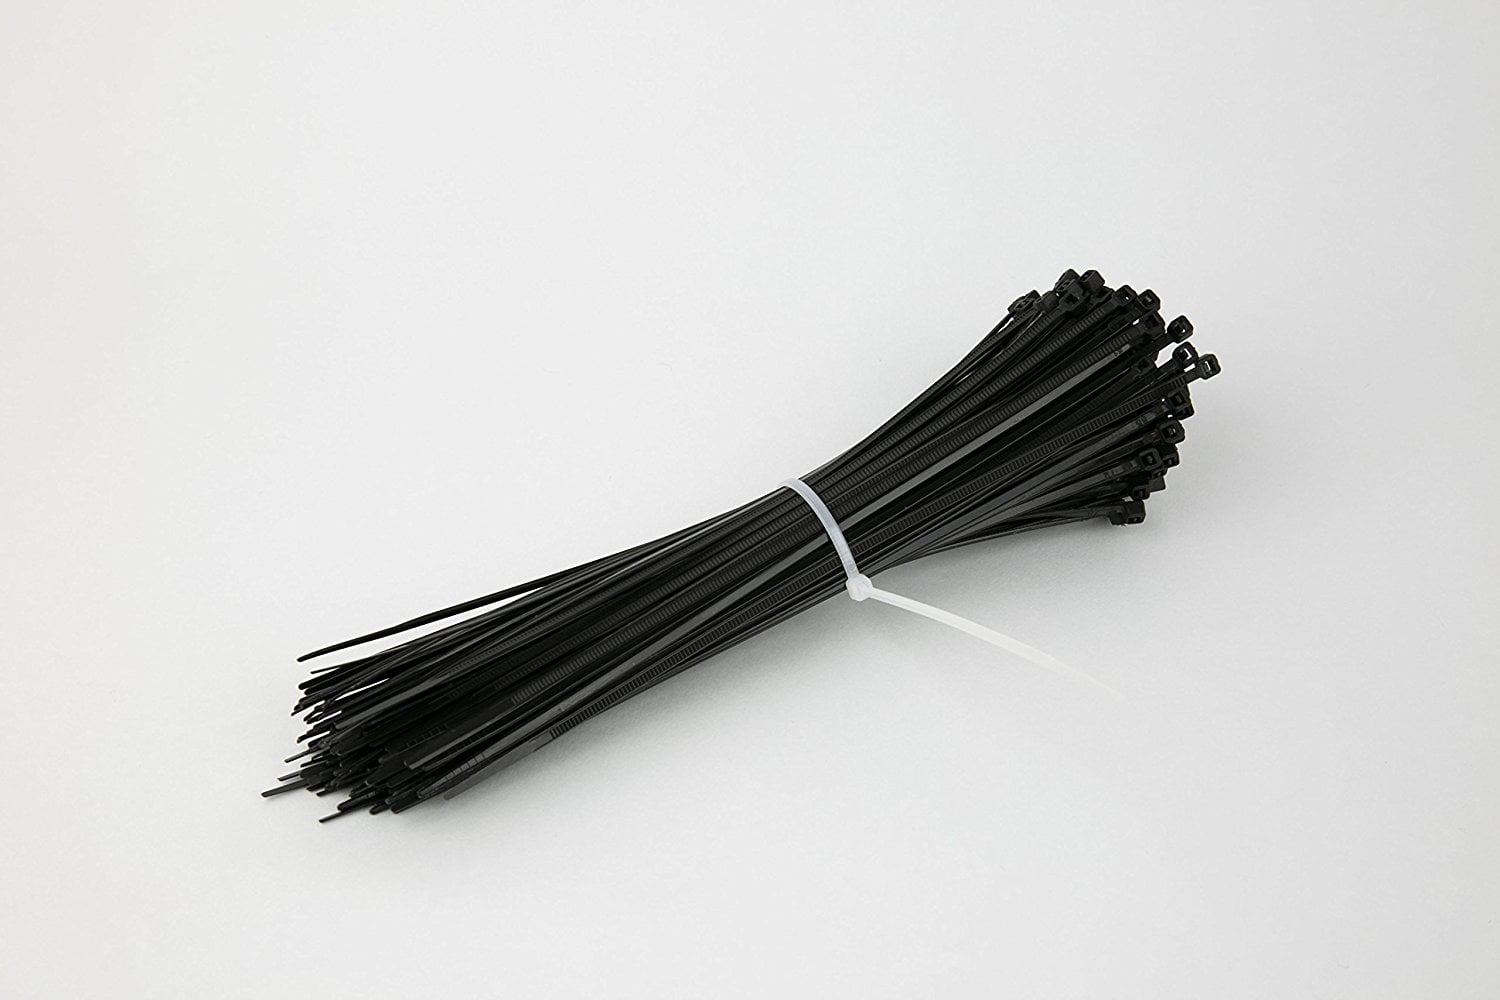 Details about   Cable Zip Ties Industrial Nylon Zip Ties Self-locking Wire Tie Wraps with 40 UV 